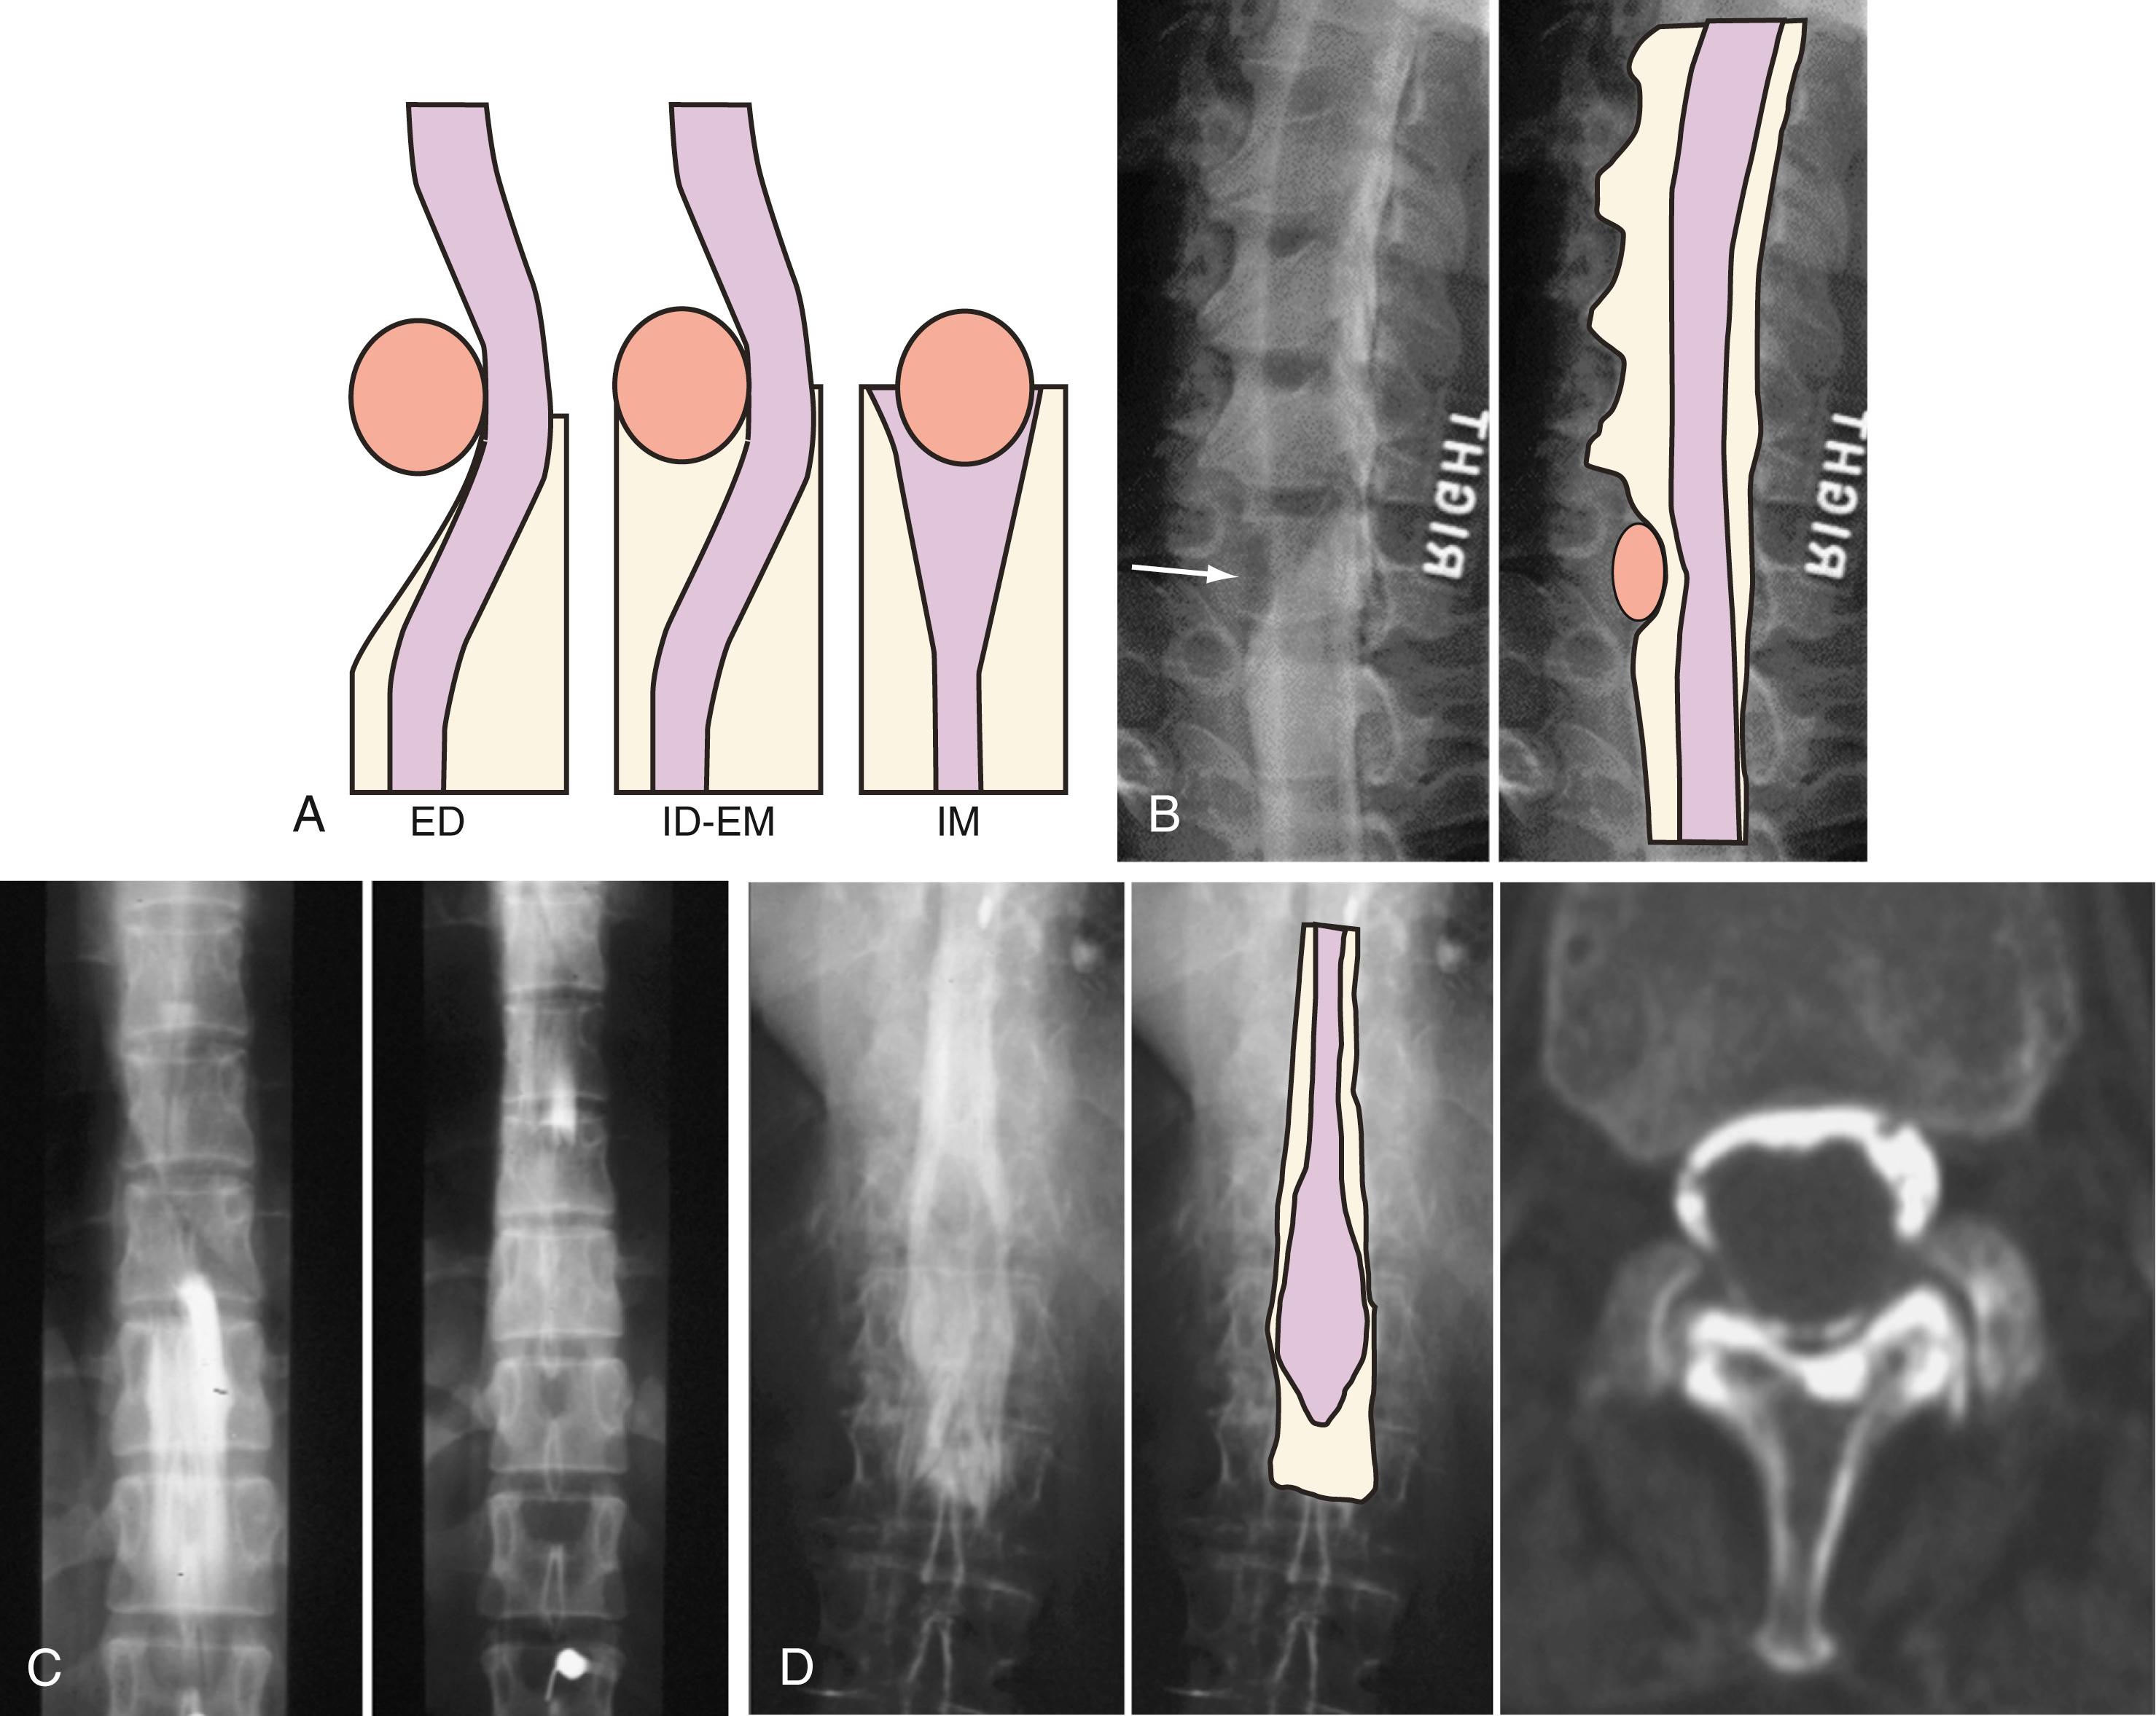 Figure 11.2, (A) Diagrammatic representation of extradural (ED), intradural extramedullary (ID-EM), and intramedullary (IM) lesions of the spine. Purple, spinal cord; orange, mass; tan, subarachnoid space. (B) Oblique view from a cervical myelogram demonstrating an extradural defect (arrow) from a herniated disk at the C6–C7 level with cutoff of the nerve root. The superimposed diagram demonstrates the typical concave inward appearance of an extradural defect. (C) Anteroposterior (AP) radiographs from a thoracic myelogram demonstrating an intradural extramedullary lesion. Contrast agent was introduced into the subarachnoid material below the lesion on the left radiograph and at the C1–C2 level to outline the superior extent of the lesion on the right radiograph. Leftward displacement of the spinal cord silhouette is visible. (D) Left and middle, AP views from a thoracic myelogram demonstrating an intramedullary mass at the conus. The contrast column in the subarachnoid space is splayed around the intramedullary mass. CT myelogram (right) demonstrates the enlarged conus.